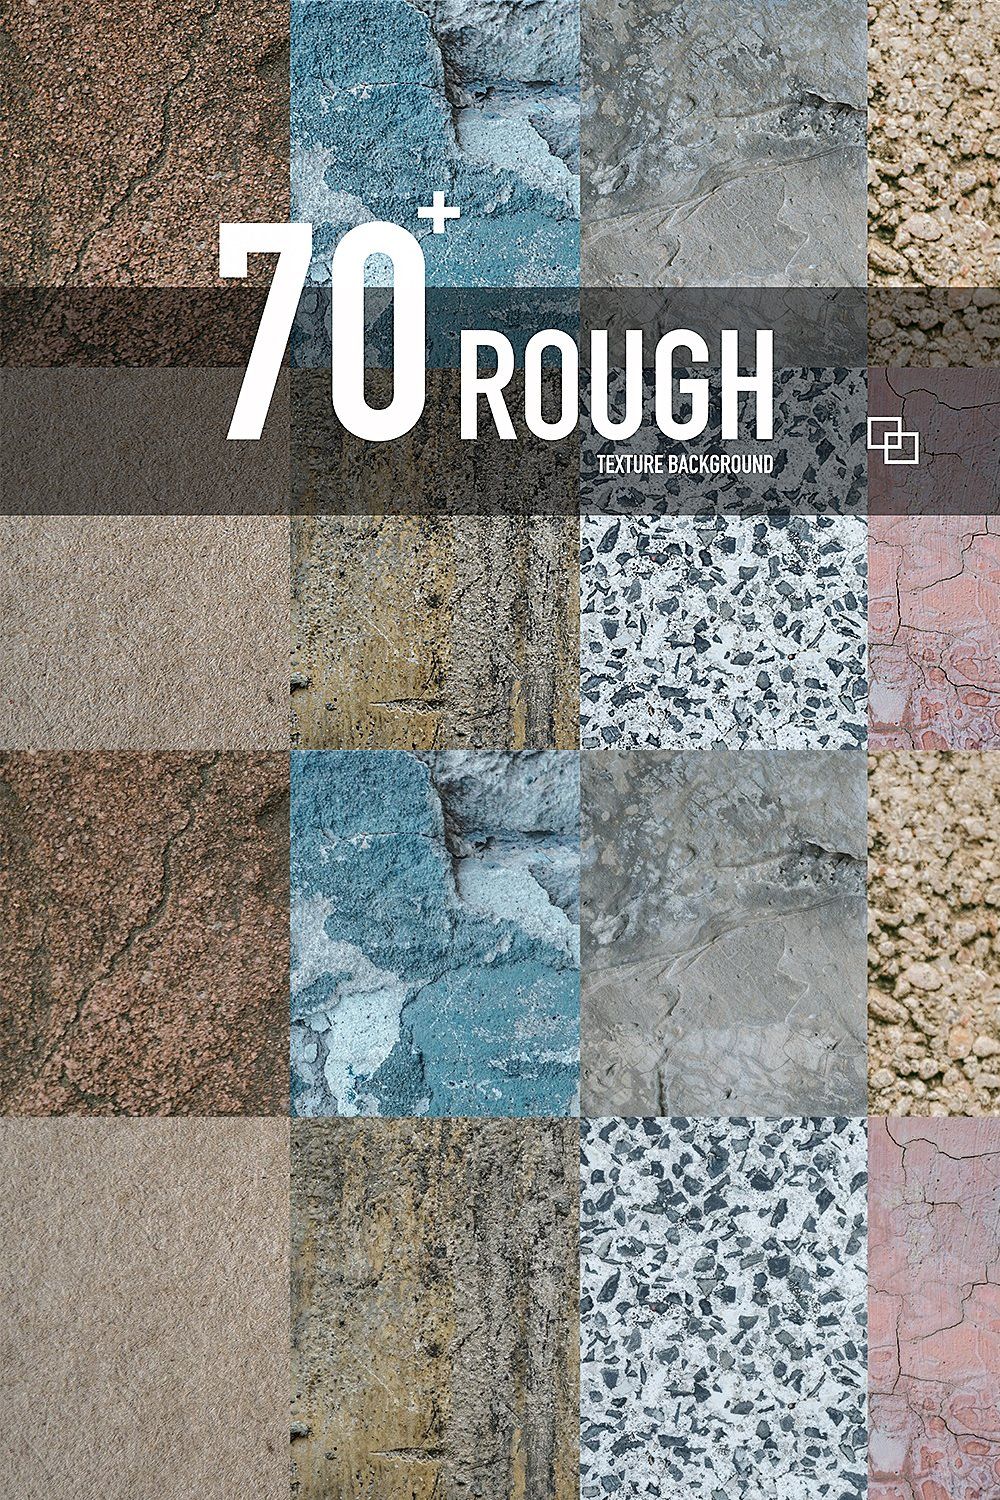 +70 Rough texture background pinterest preview image.